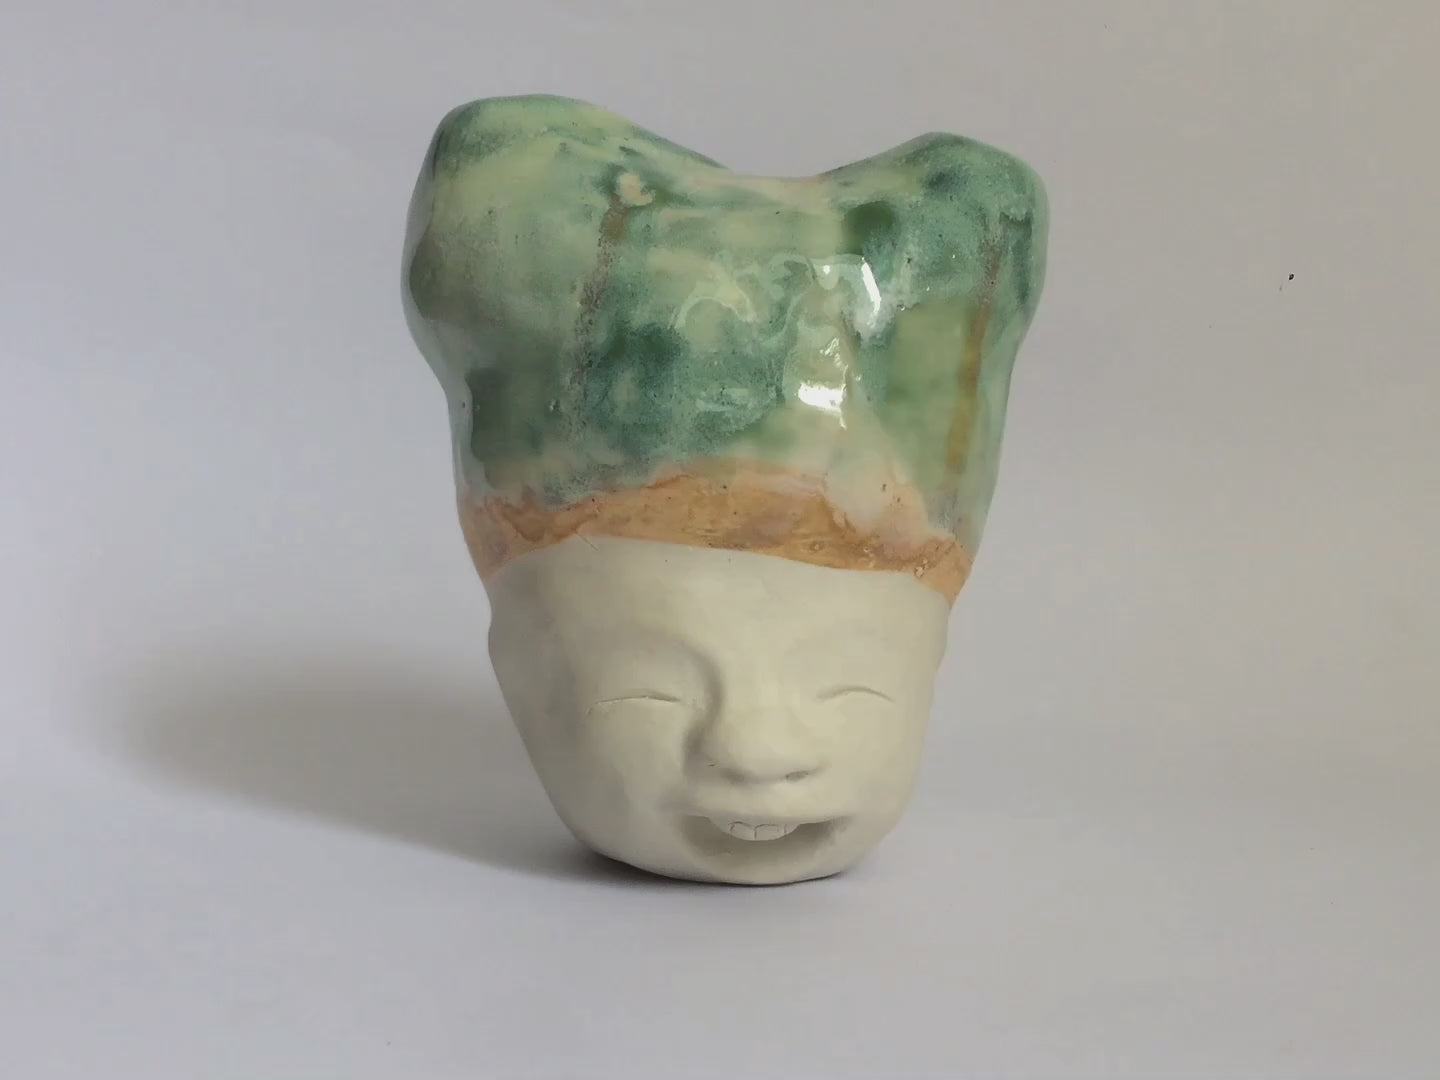 White figurative sculpture with mixed glazed head.